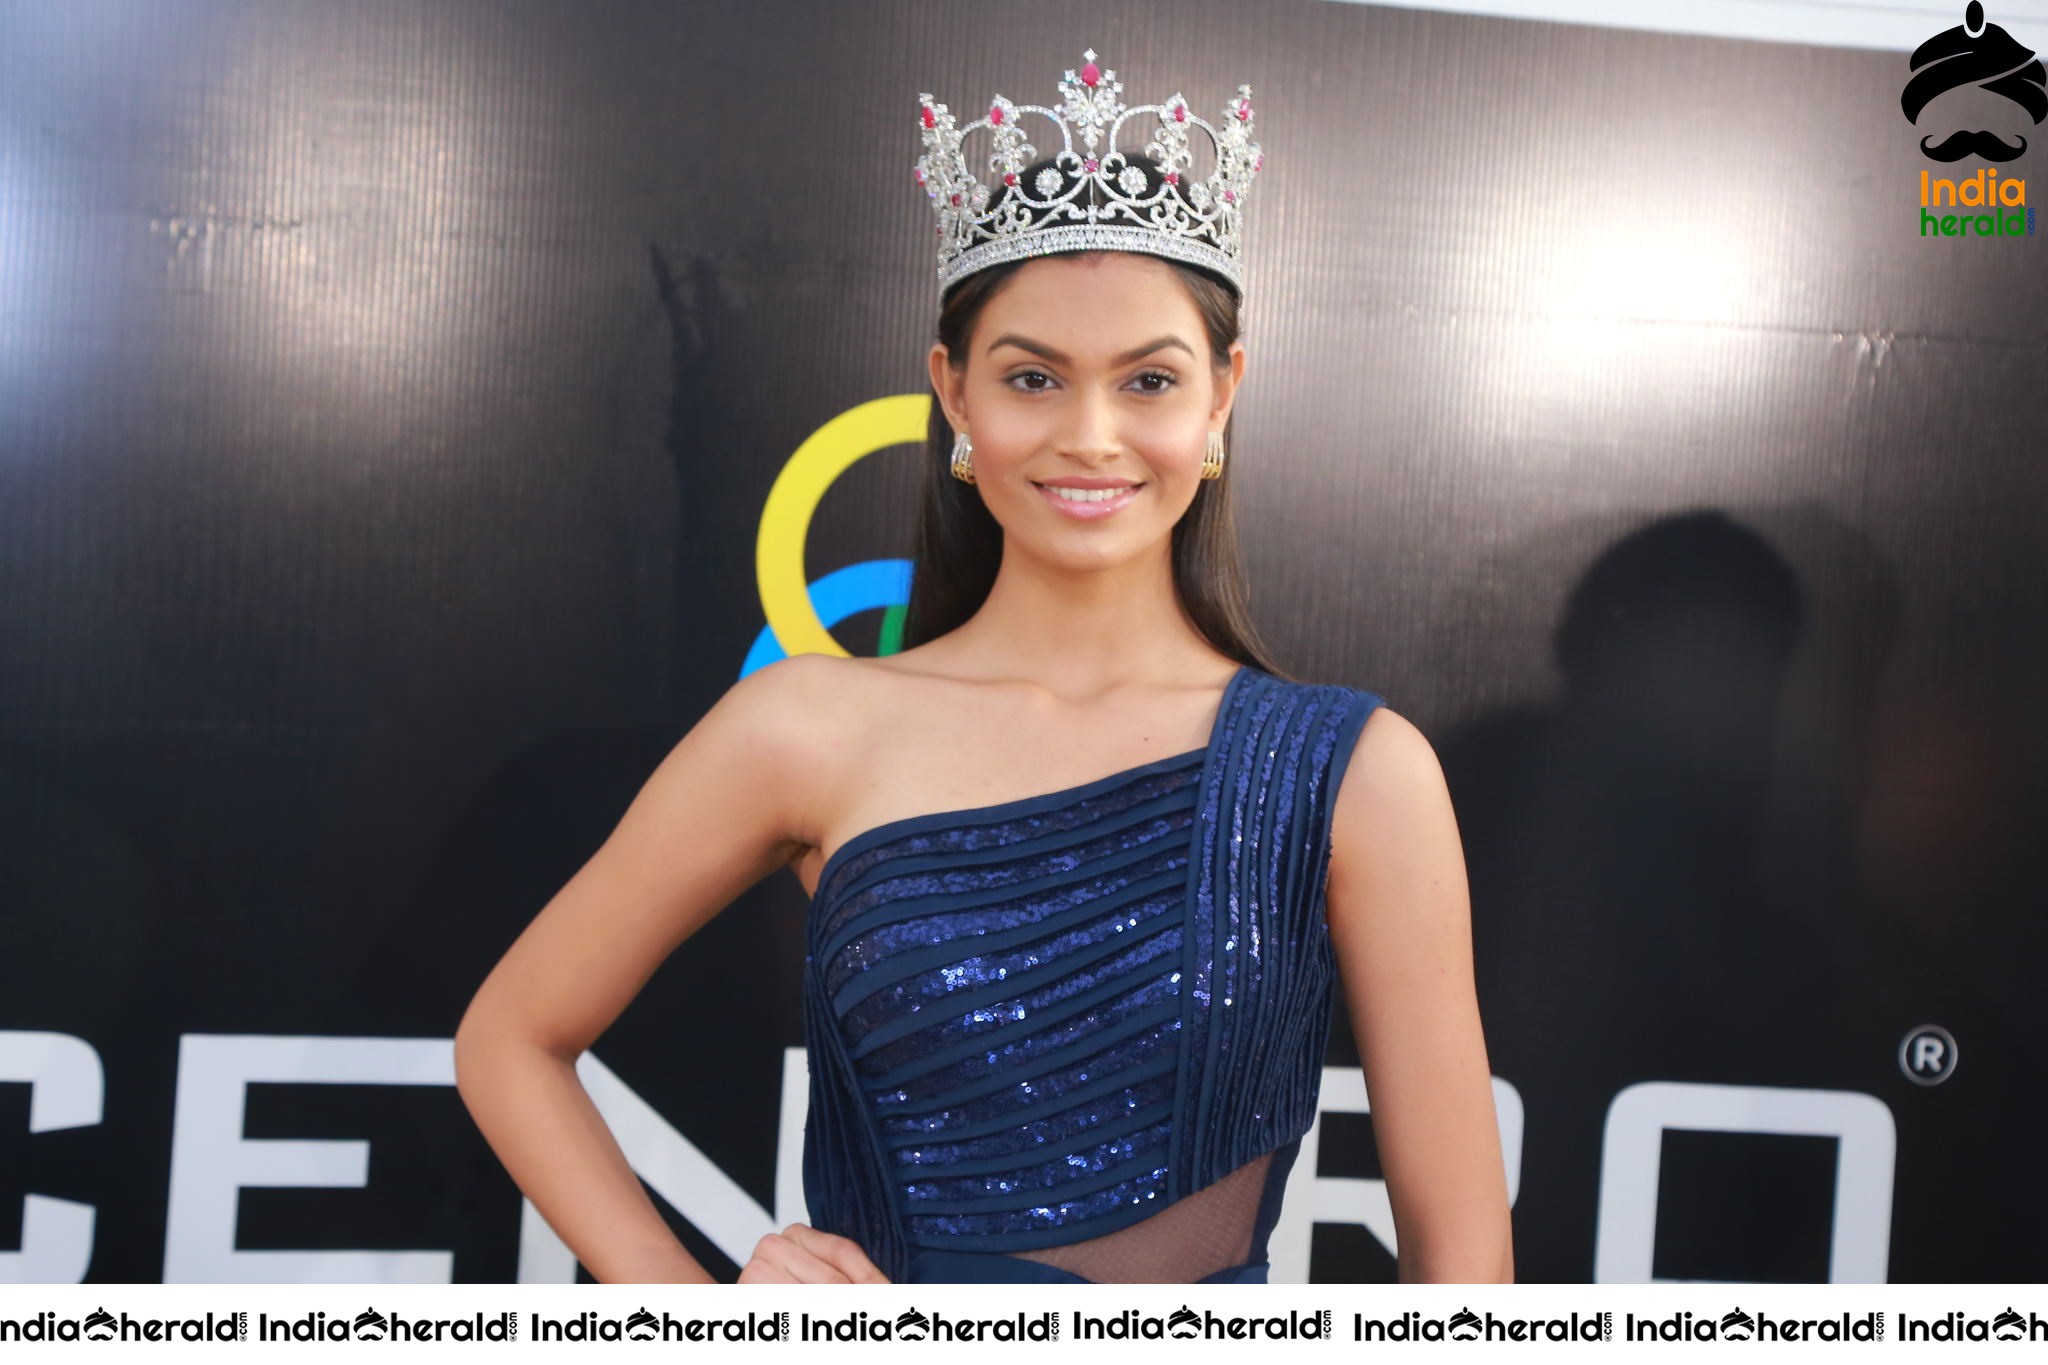 Miss India 2019 Suman Rao Winner Unveiled Wedding And Festive Footwear Collection At Centro Set 3